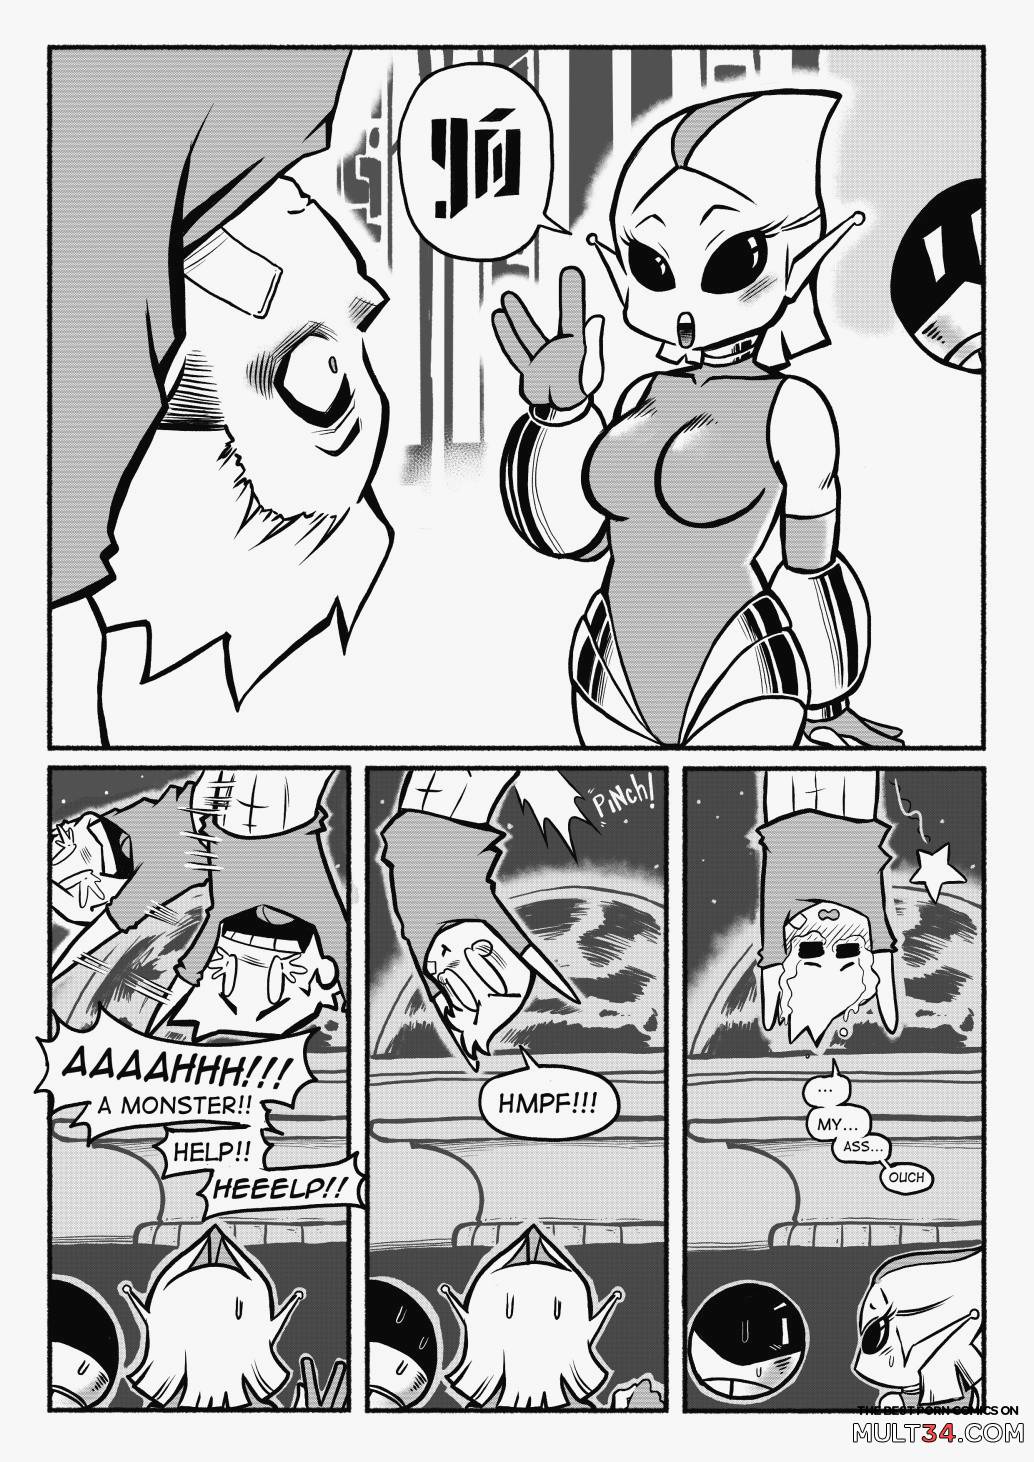 Abducted! - Mr.E page 5